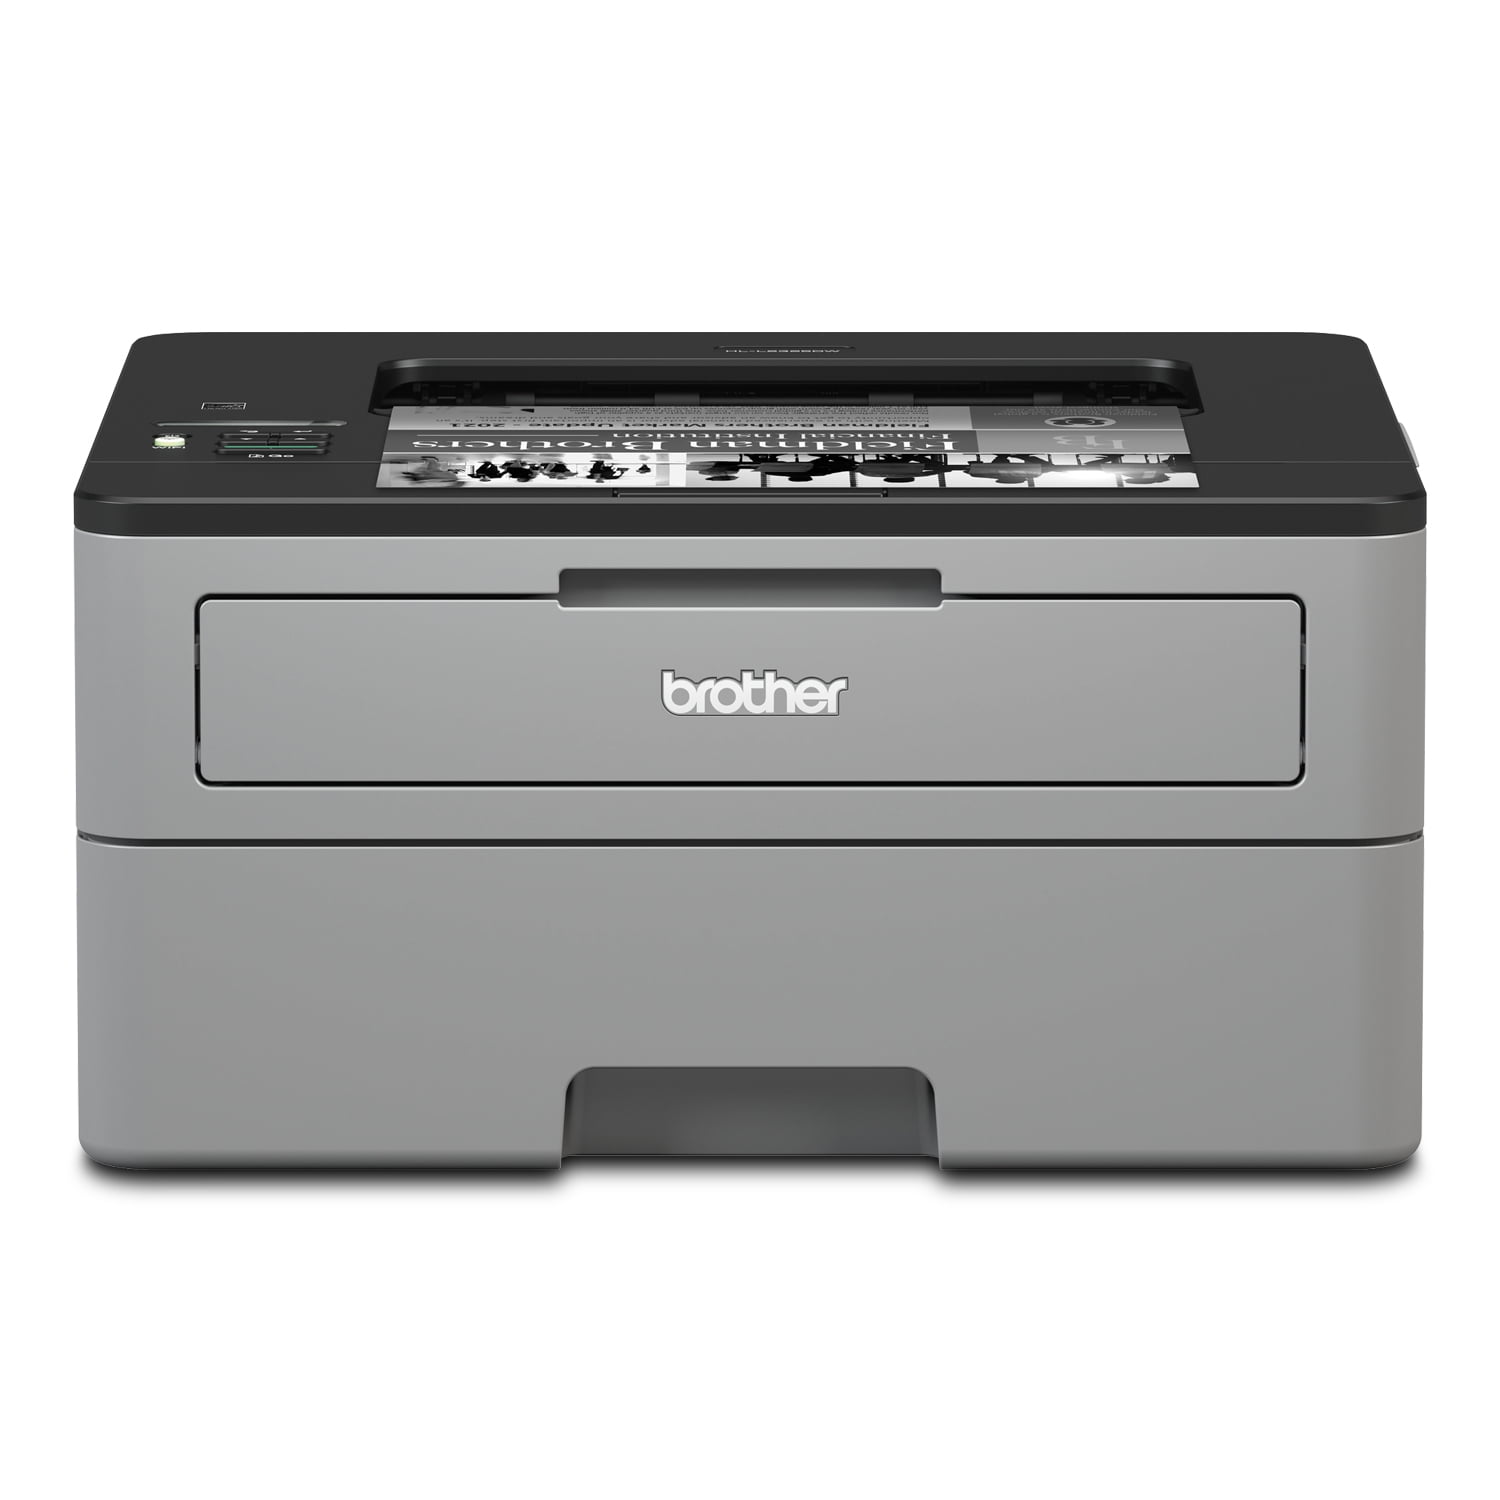 Laserjet Brother Color Printer, Paper Size: A4 at best price in